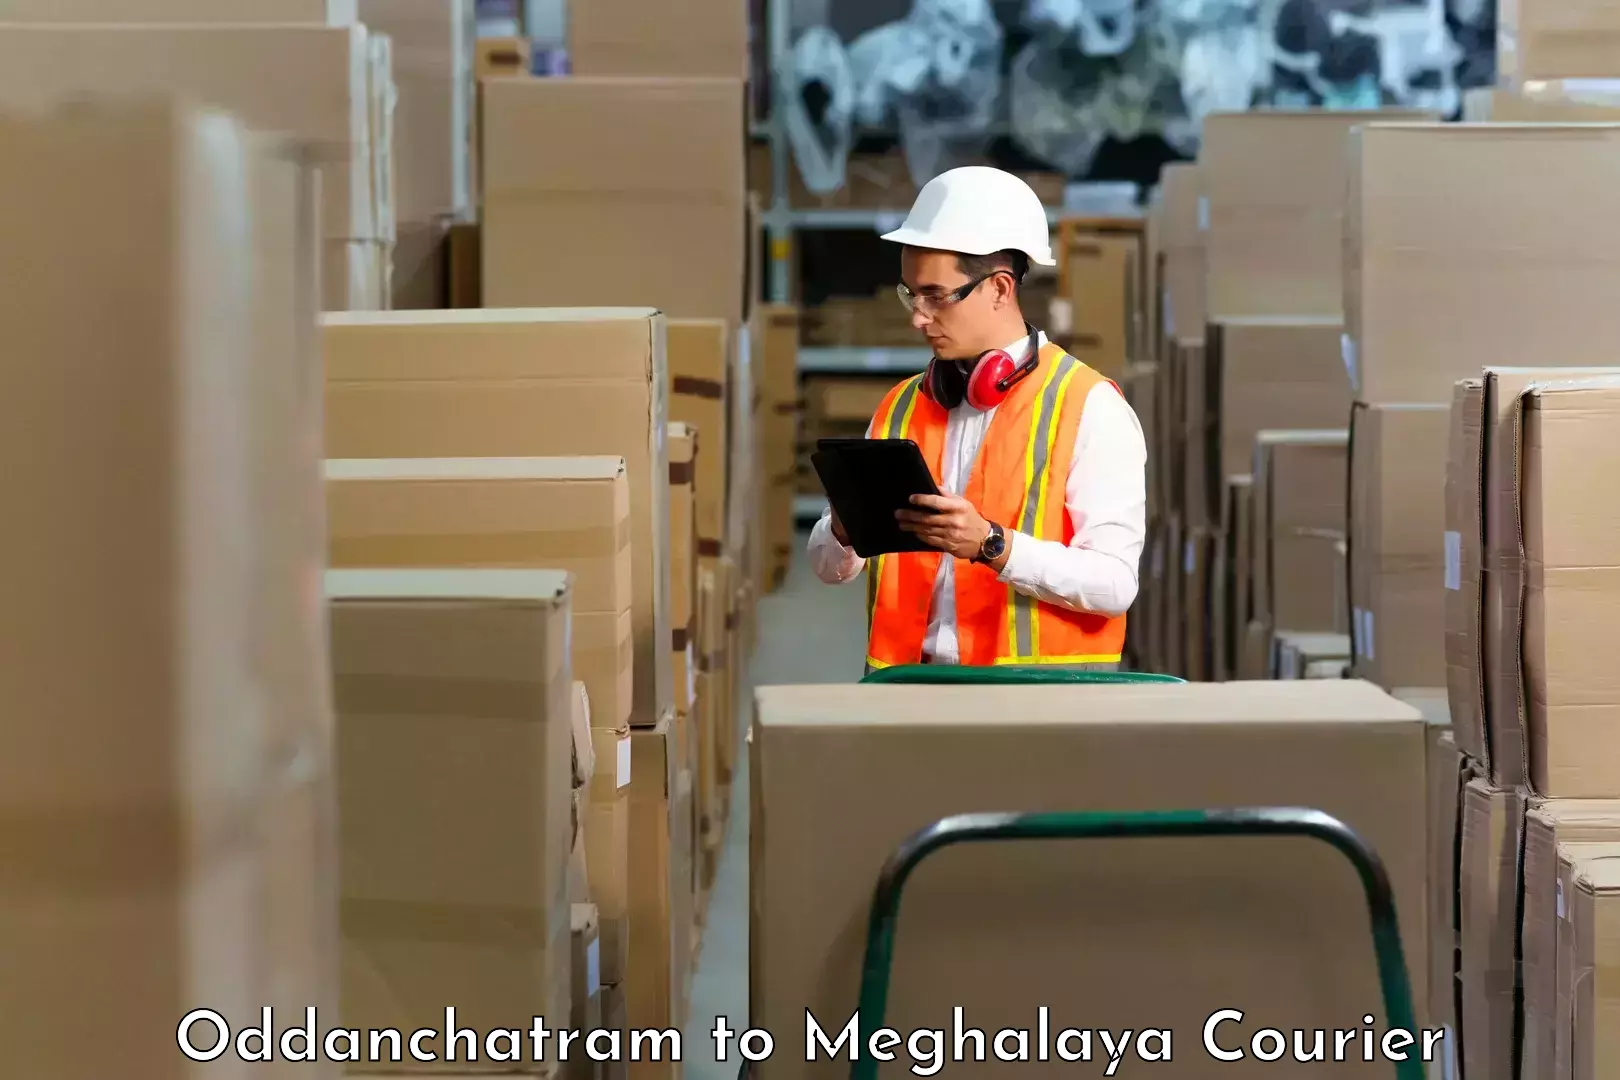 Small business couriers Oddanchatram to Shillong